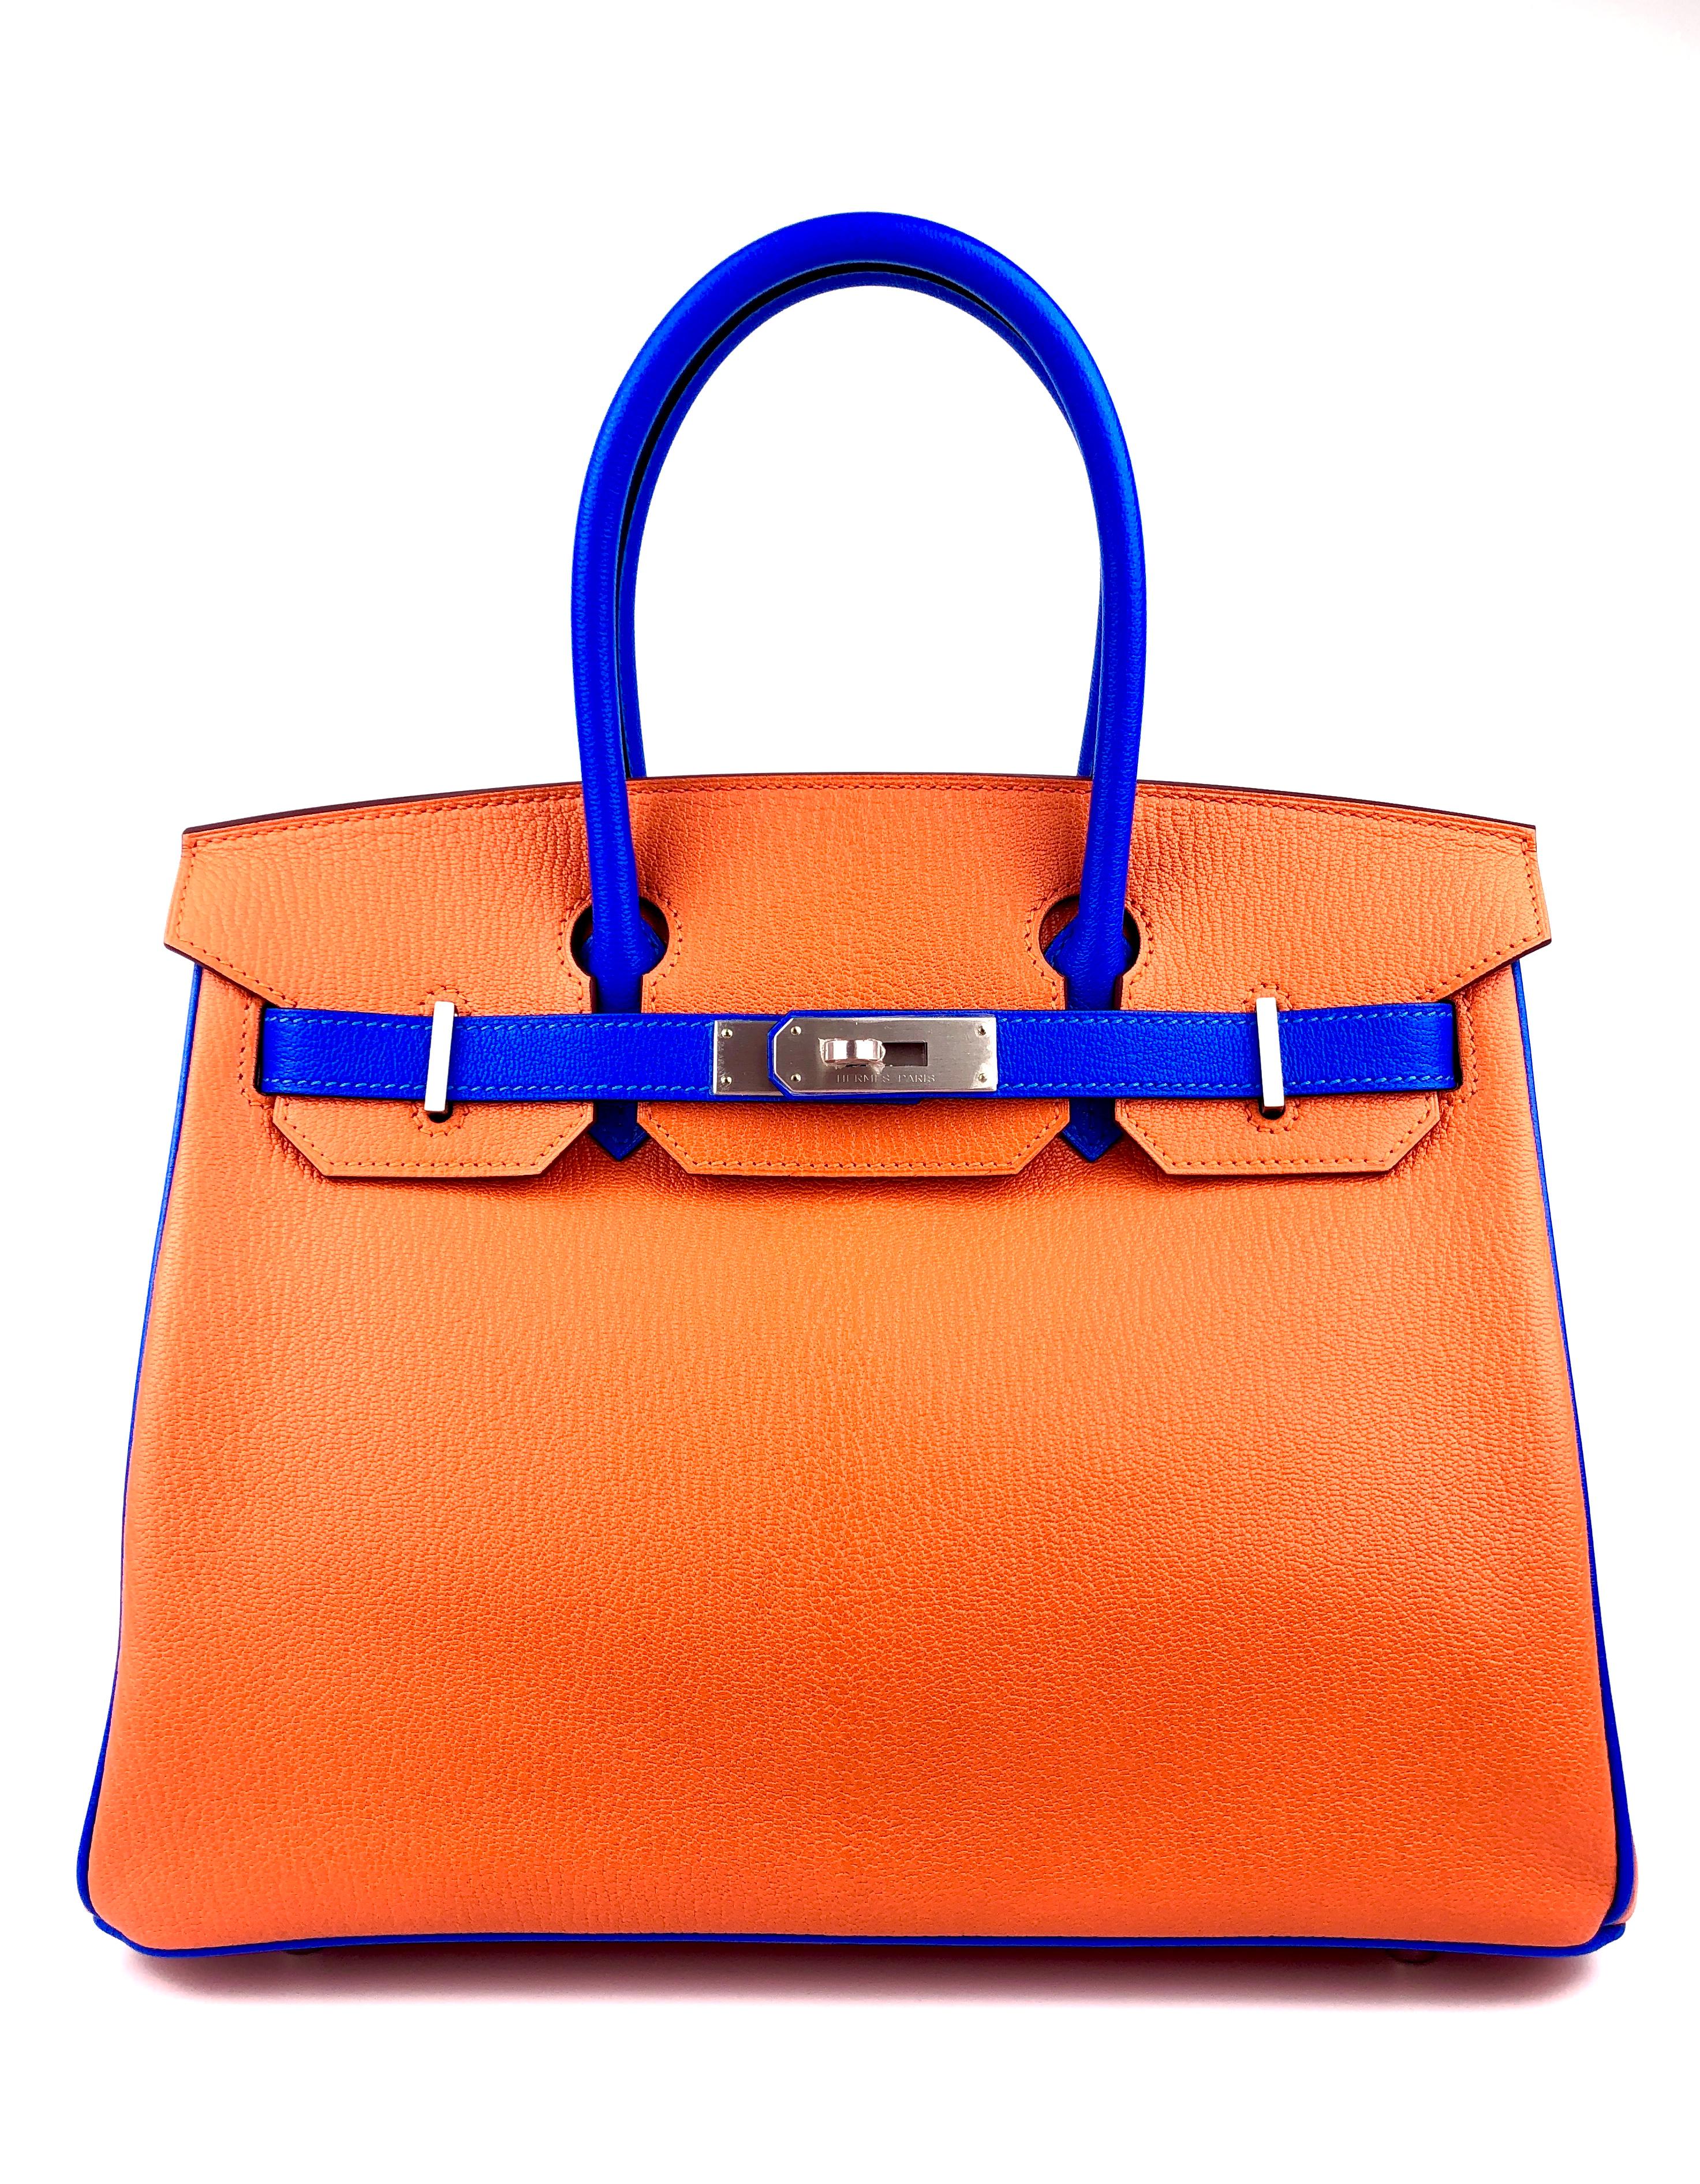 As New Stunning 1 of 1 Hermes Birkin 30 HSS Special Order Orange and Blue Hydra Leather Complimented by Brushed Palladium Hardware. All Plastic on hardware and Feet! Kept Unworn from Collectors closet. 


Shop with Confidence from Lux Addicts.